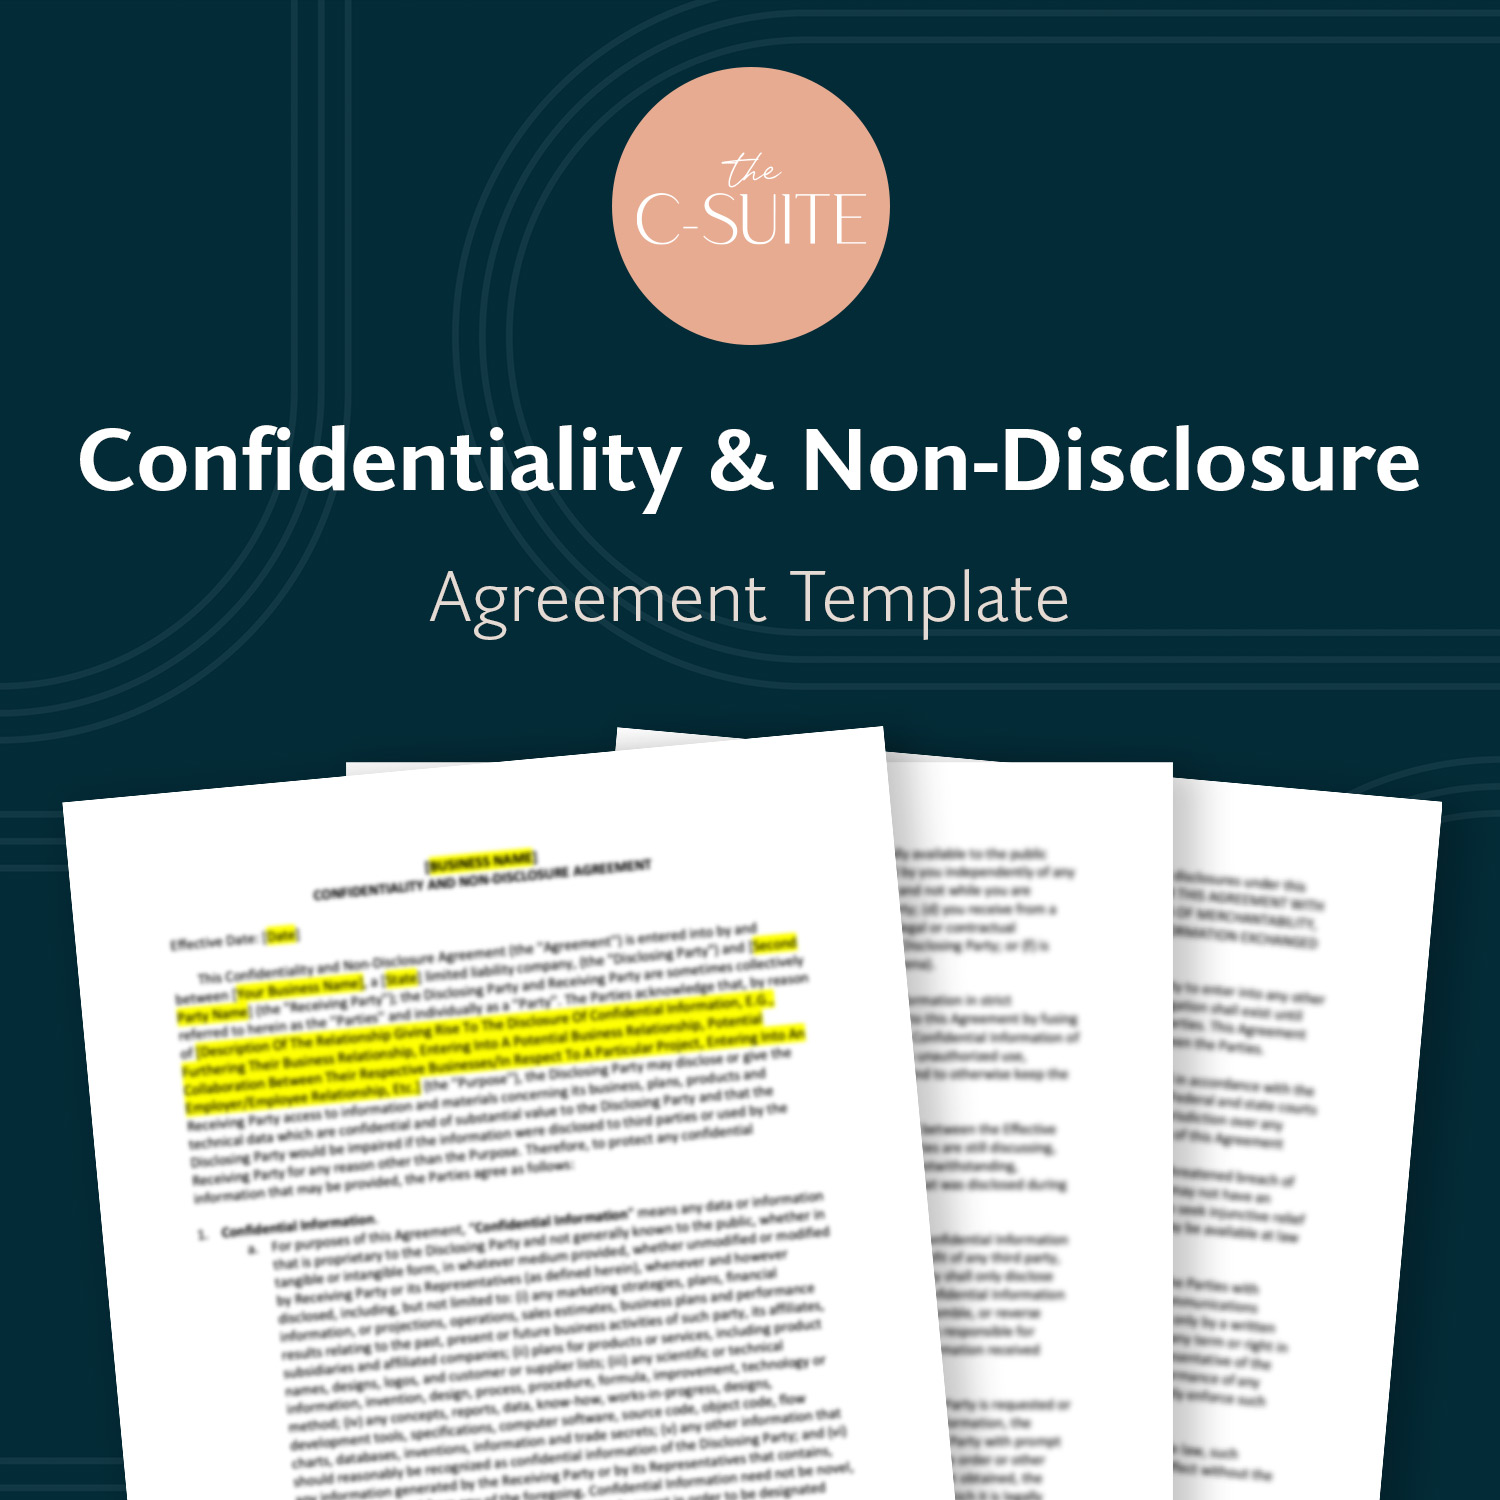 Confidentiality & Non-Disclosure Agreement